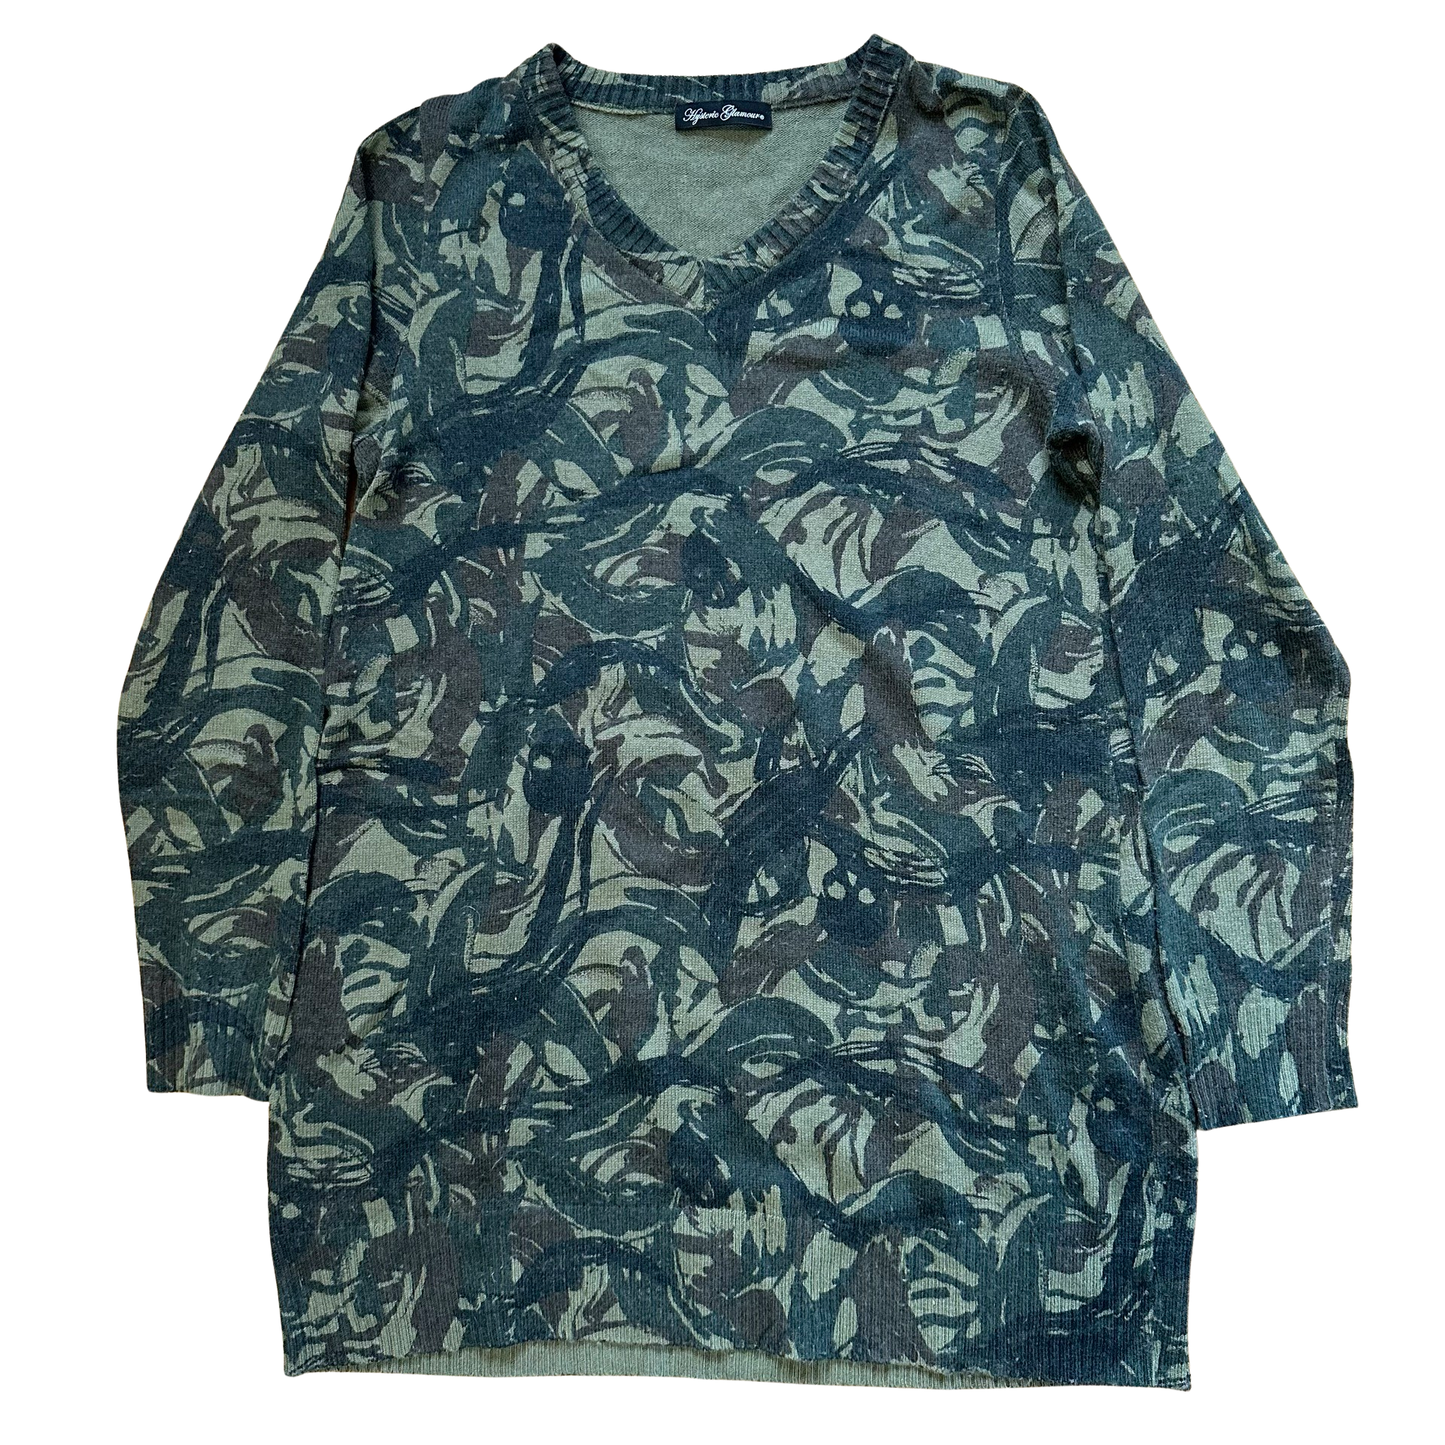 Hysteric Glamour Skull/Tribal Camo Sweater Size Small